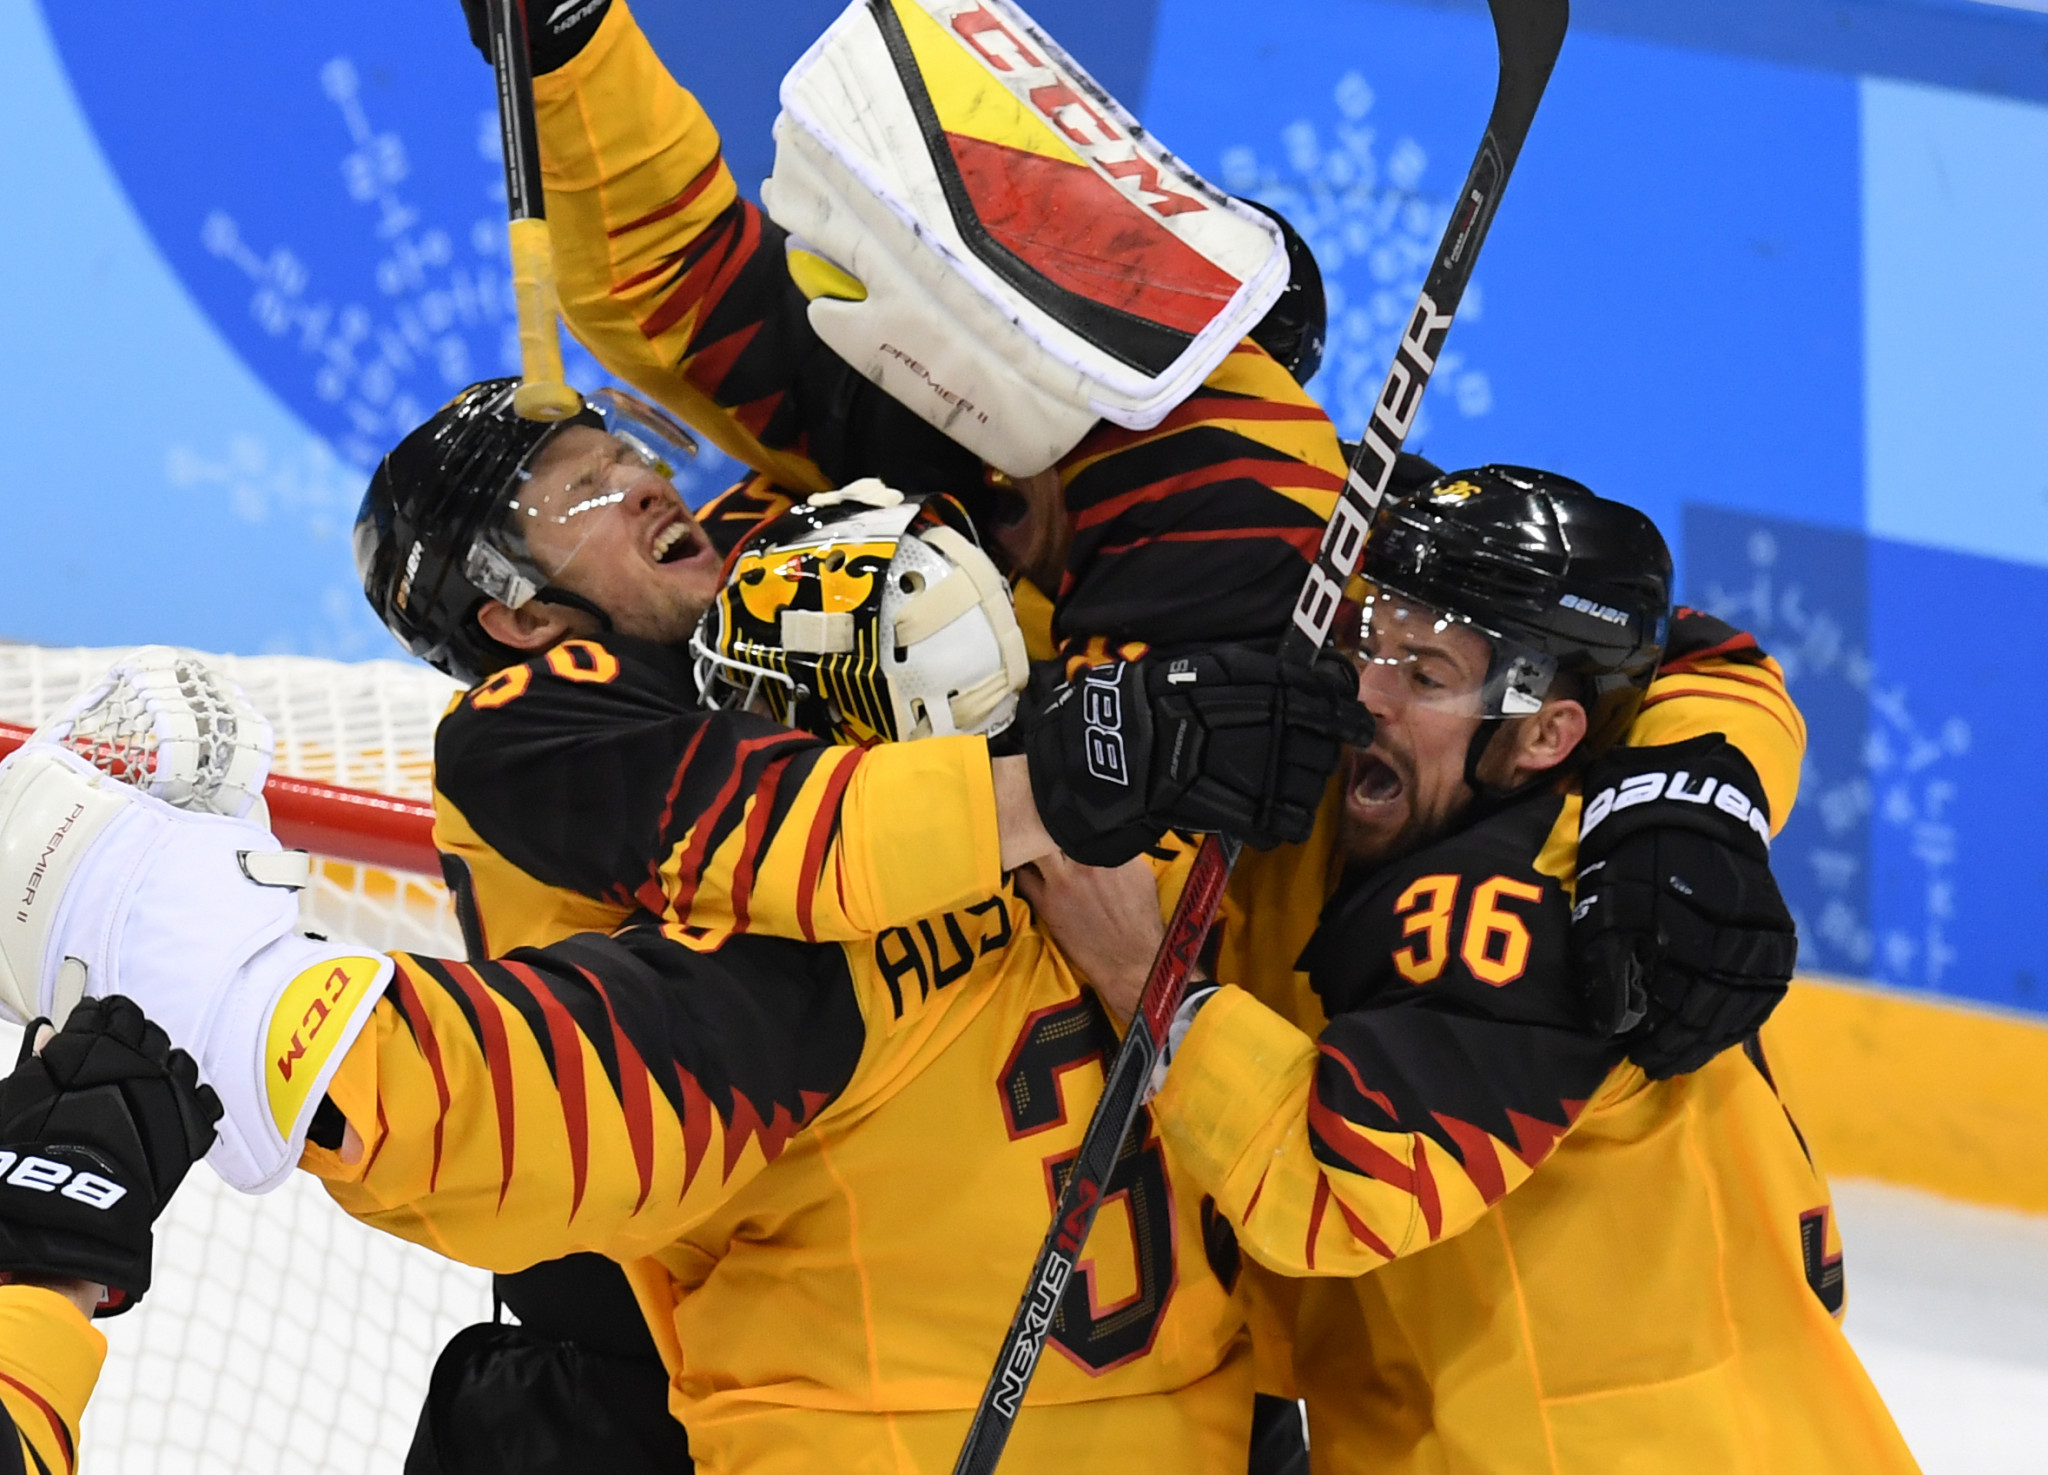 Germany won a shock silver medal at the Pyeongchang 2018 Winter Olympics ©Getty Images